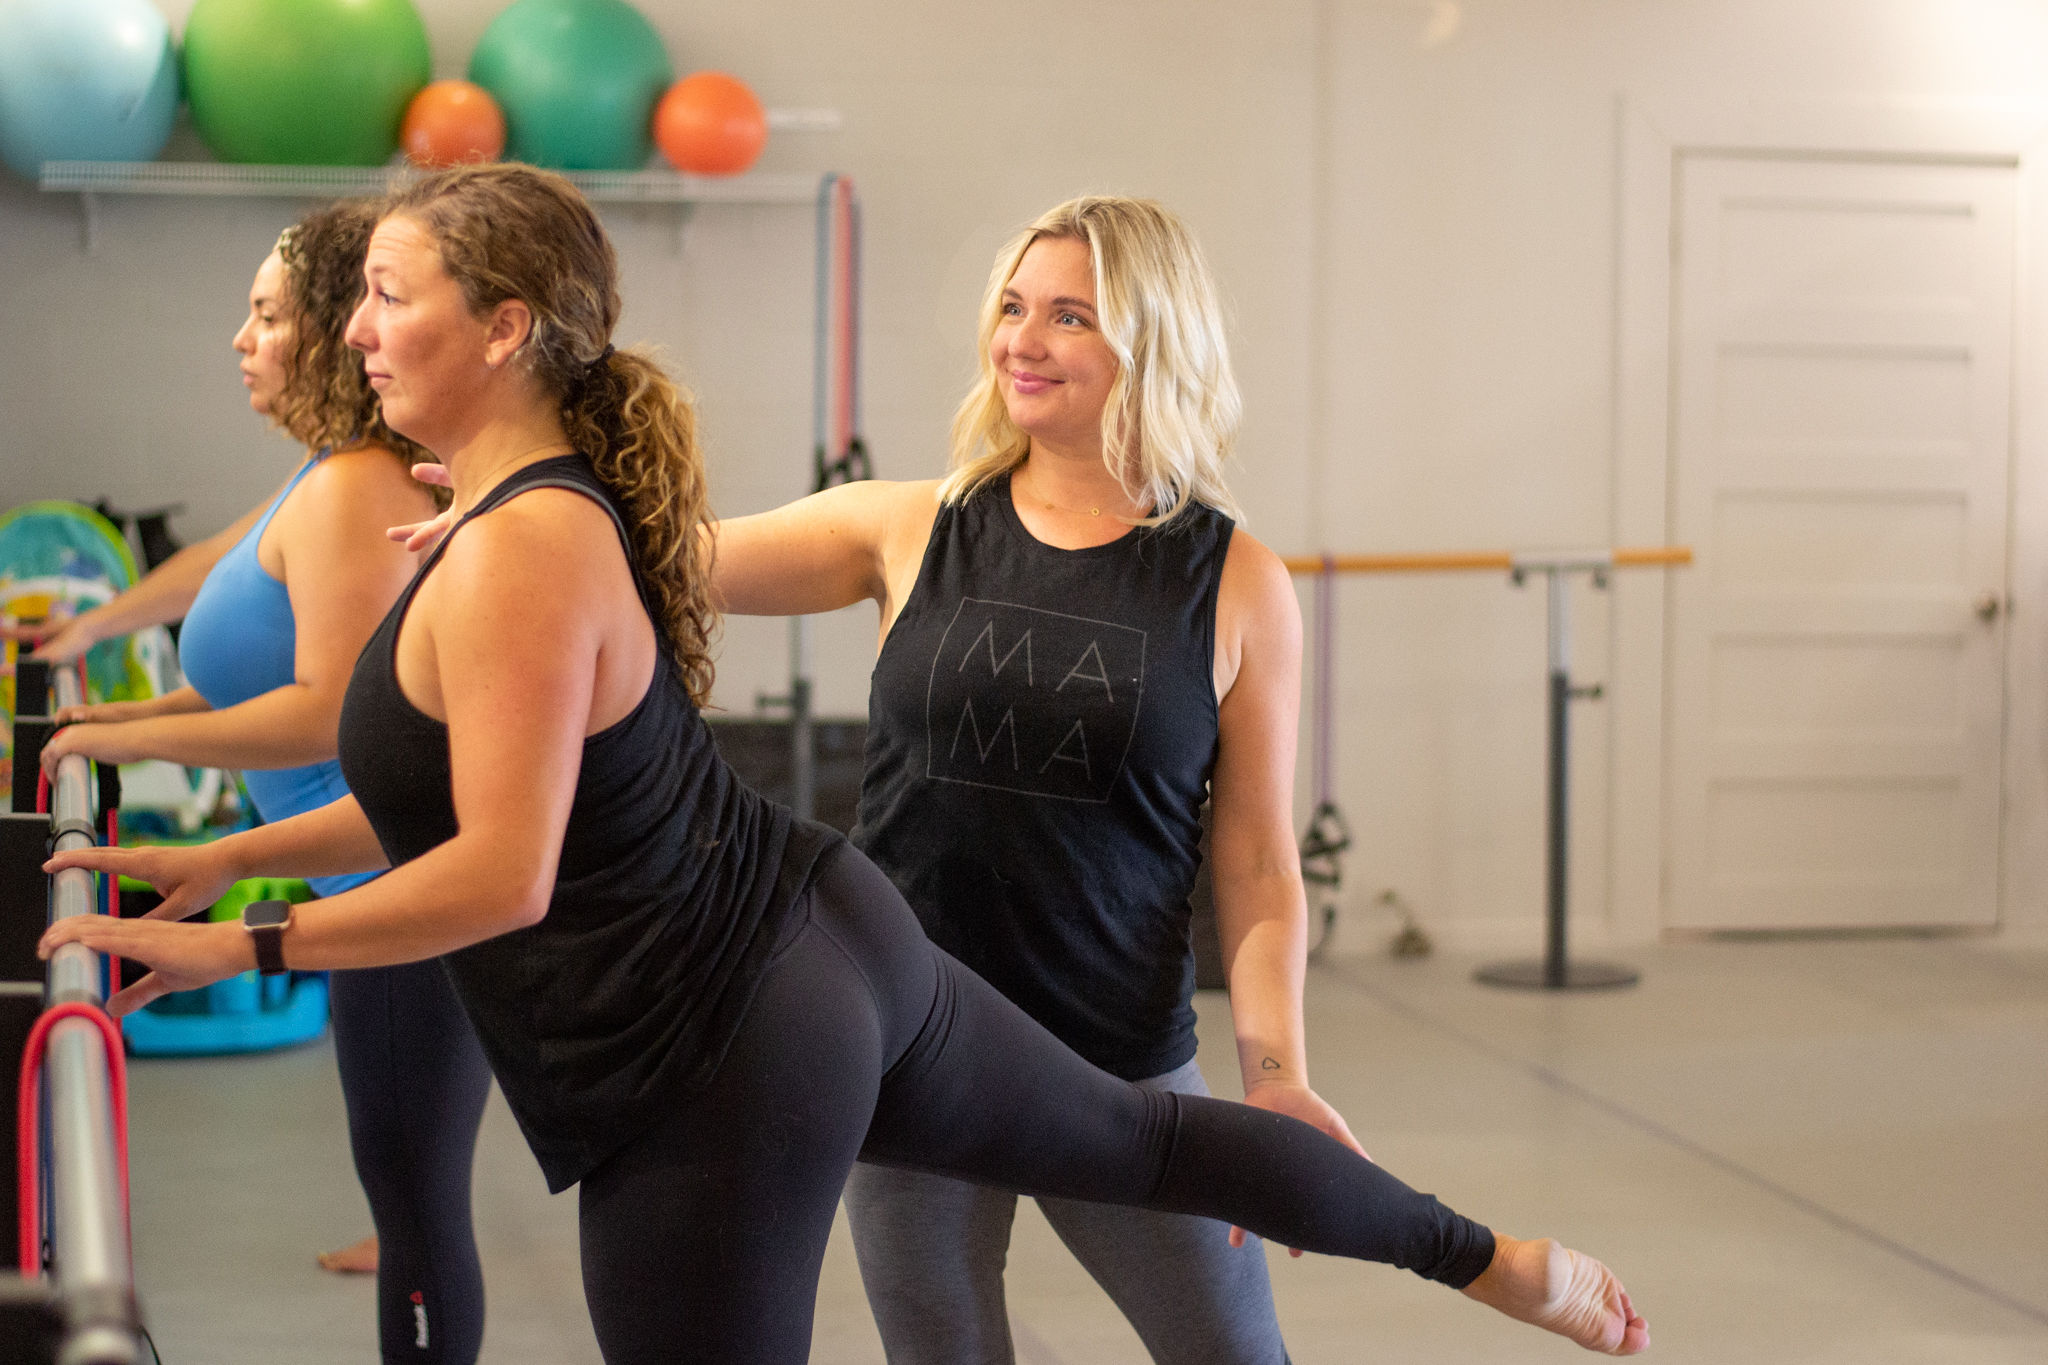 Yoga, Barre, and Pilates Class Online - Perfect Blend!